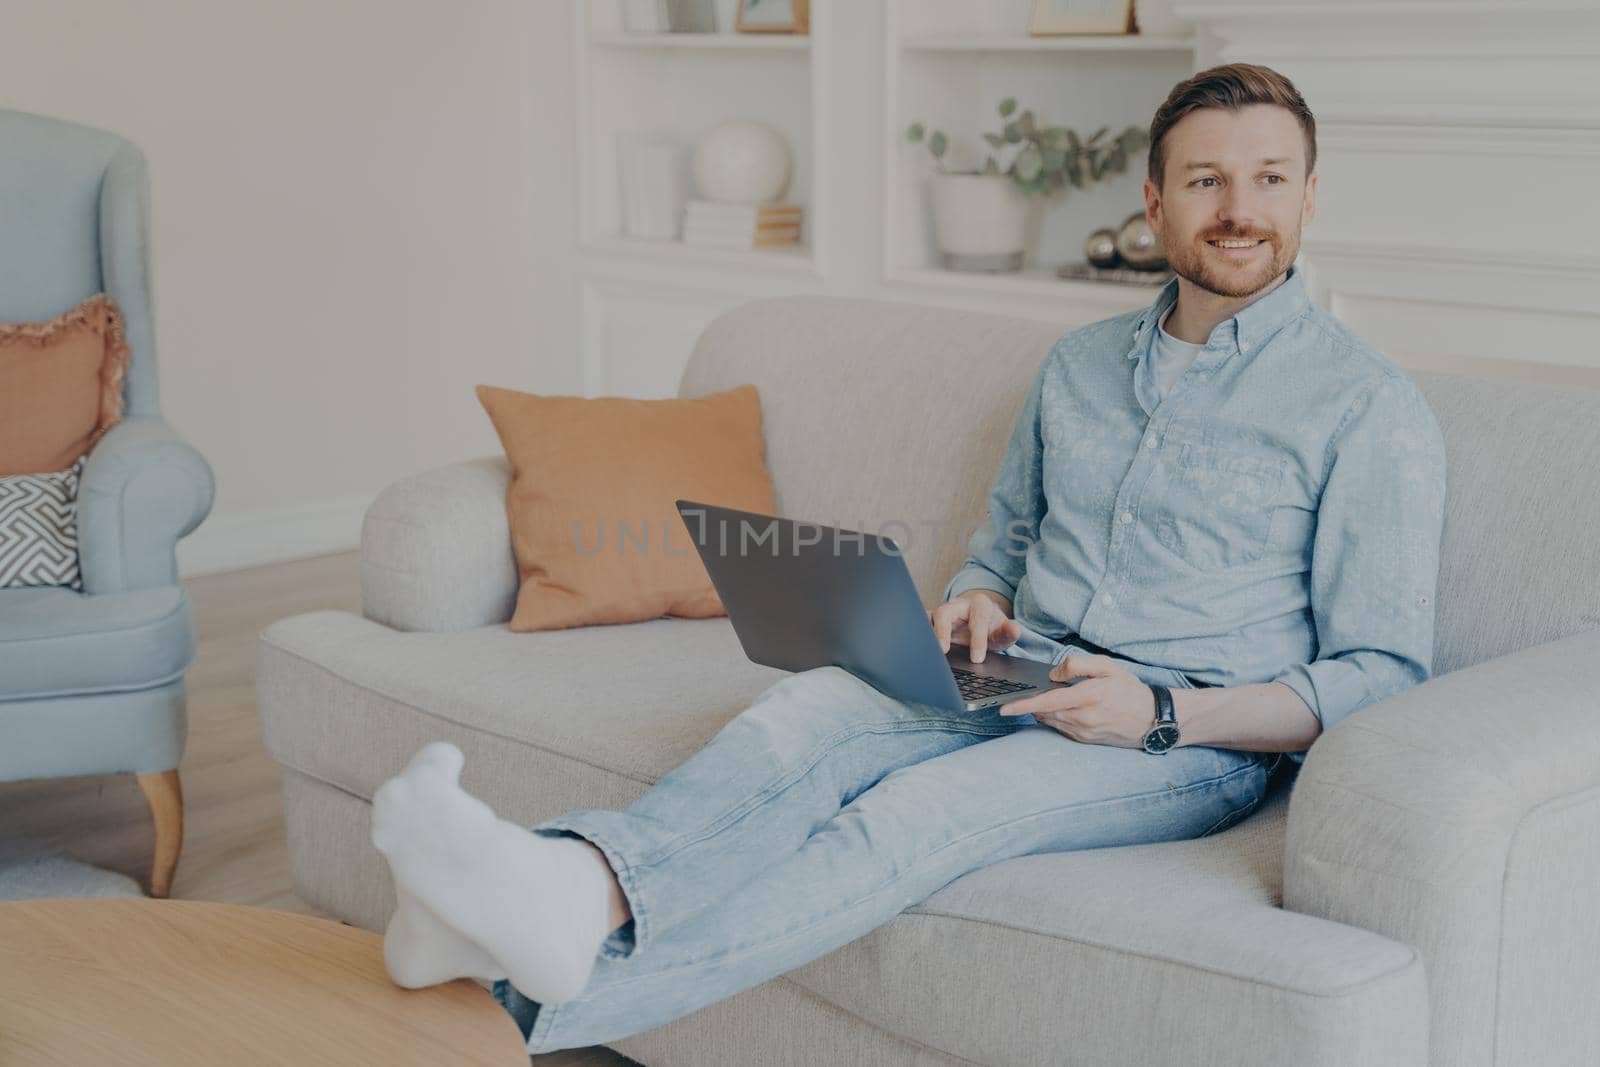 Young man with stubble surfing web on his laptop while sitting on couch, resting legs on coffee table, relaxing after hard work session on project, taking break from working